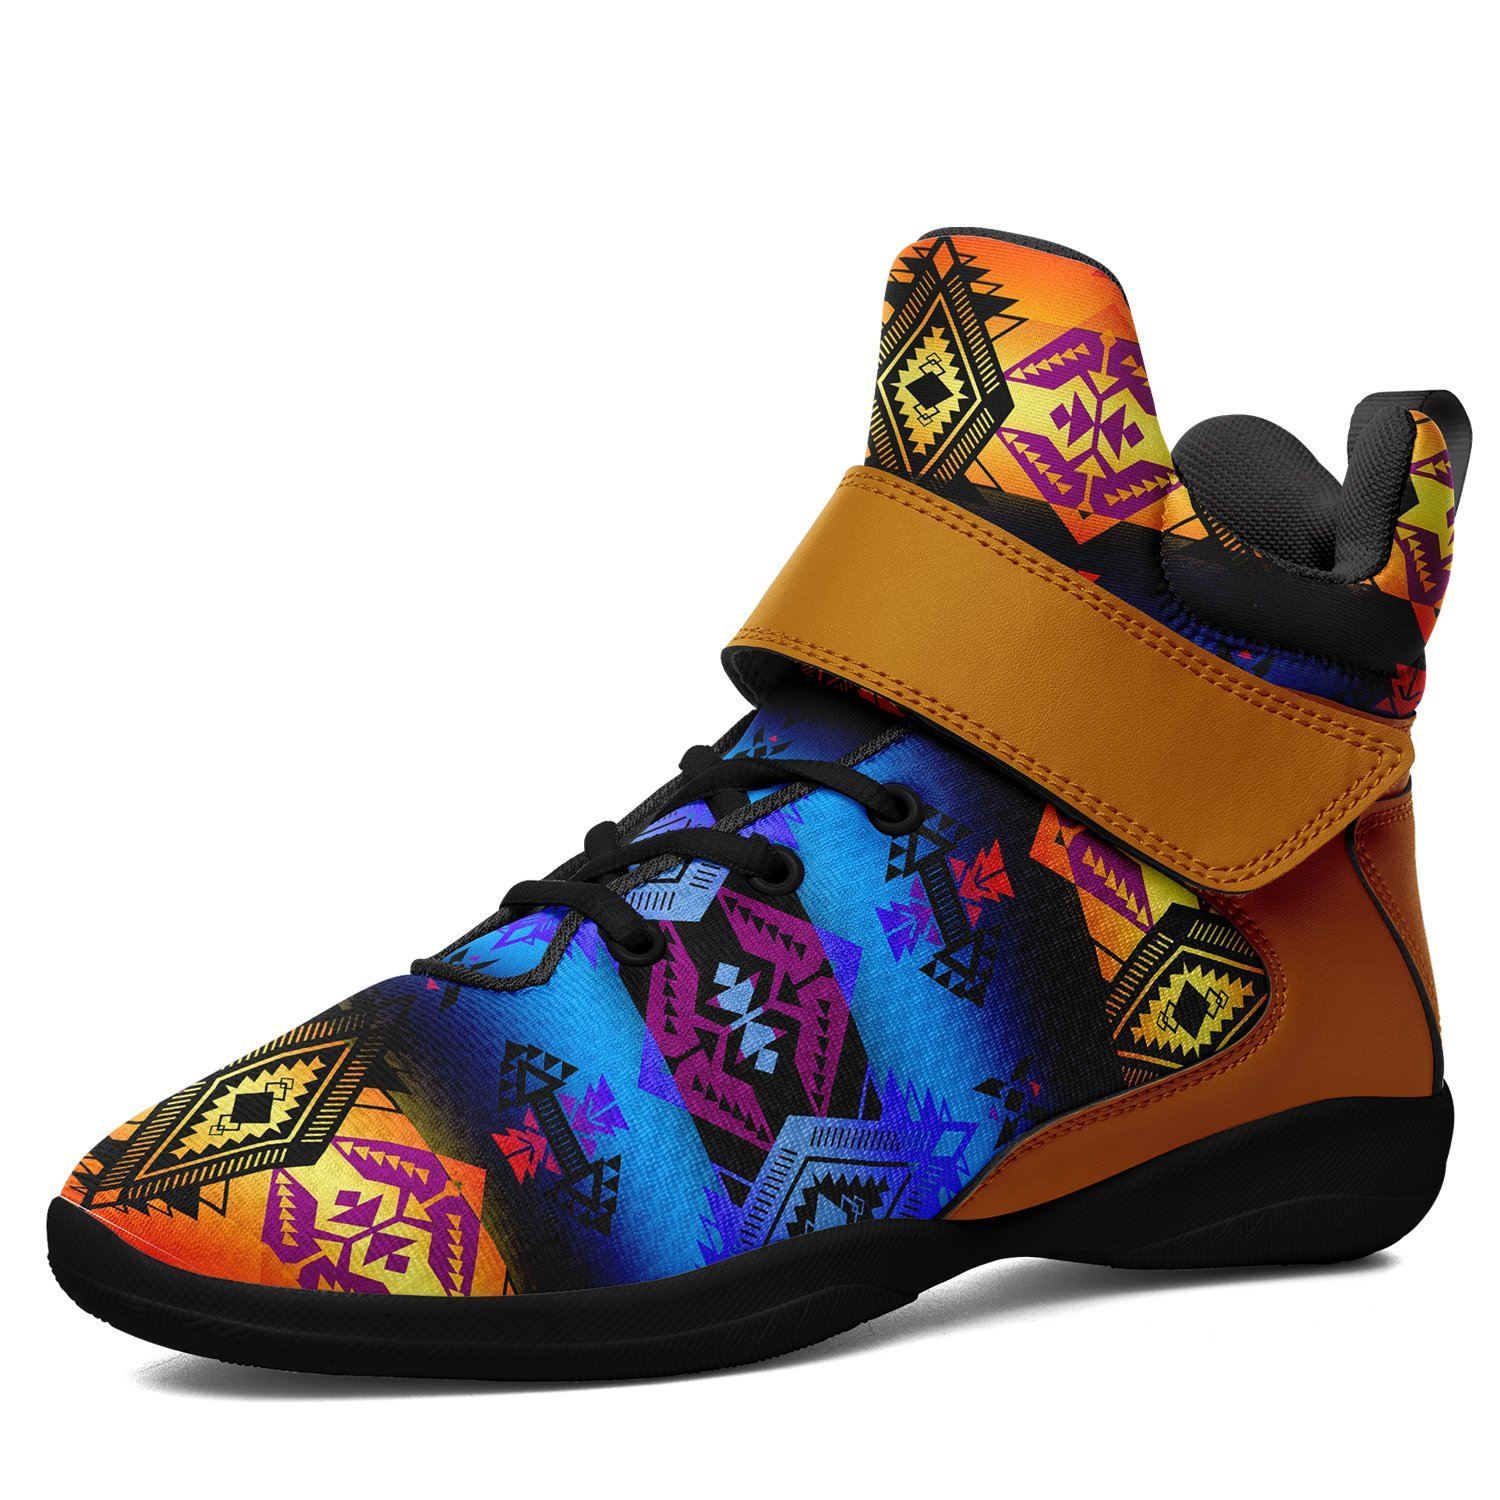 Sovereign Nation Sunset Ipottaa Basketball / Sport High Top Shoes - Black Sole 49 Dzine US Men 7 / EUR 40 Black Sole with Brown Strap 